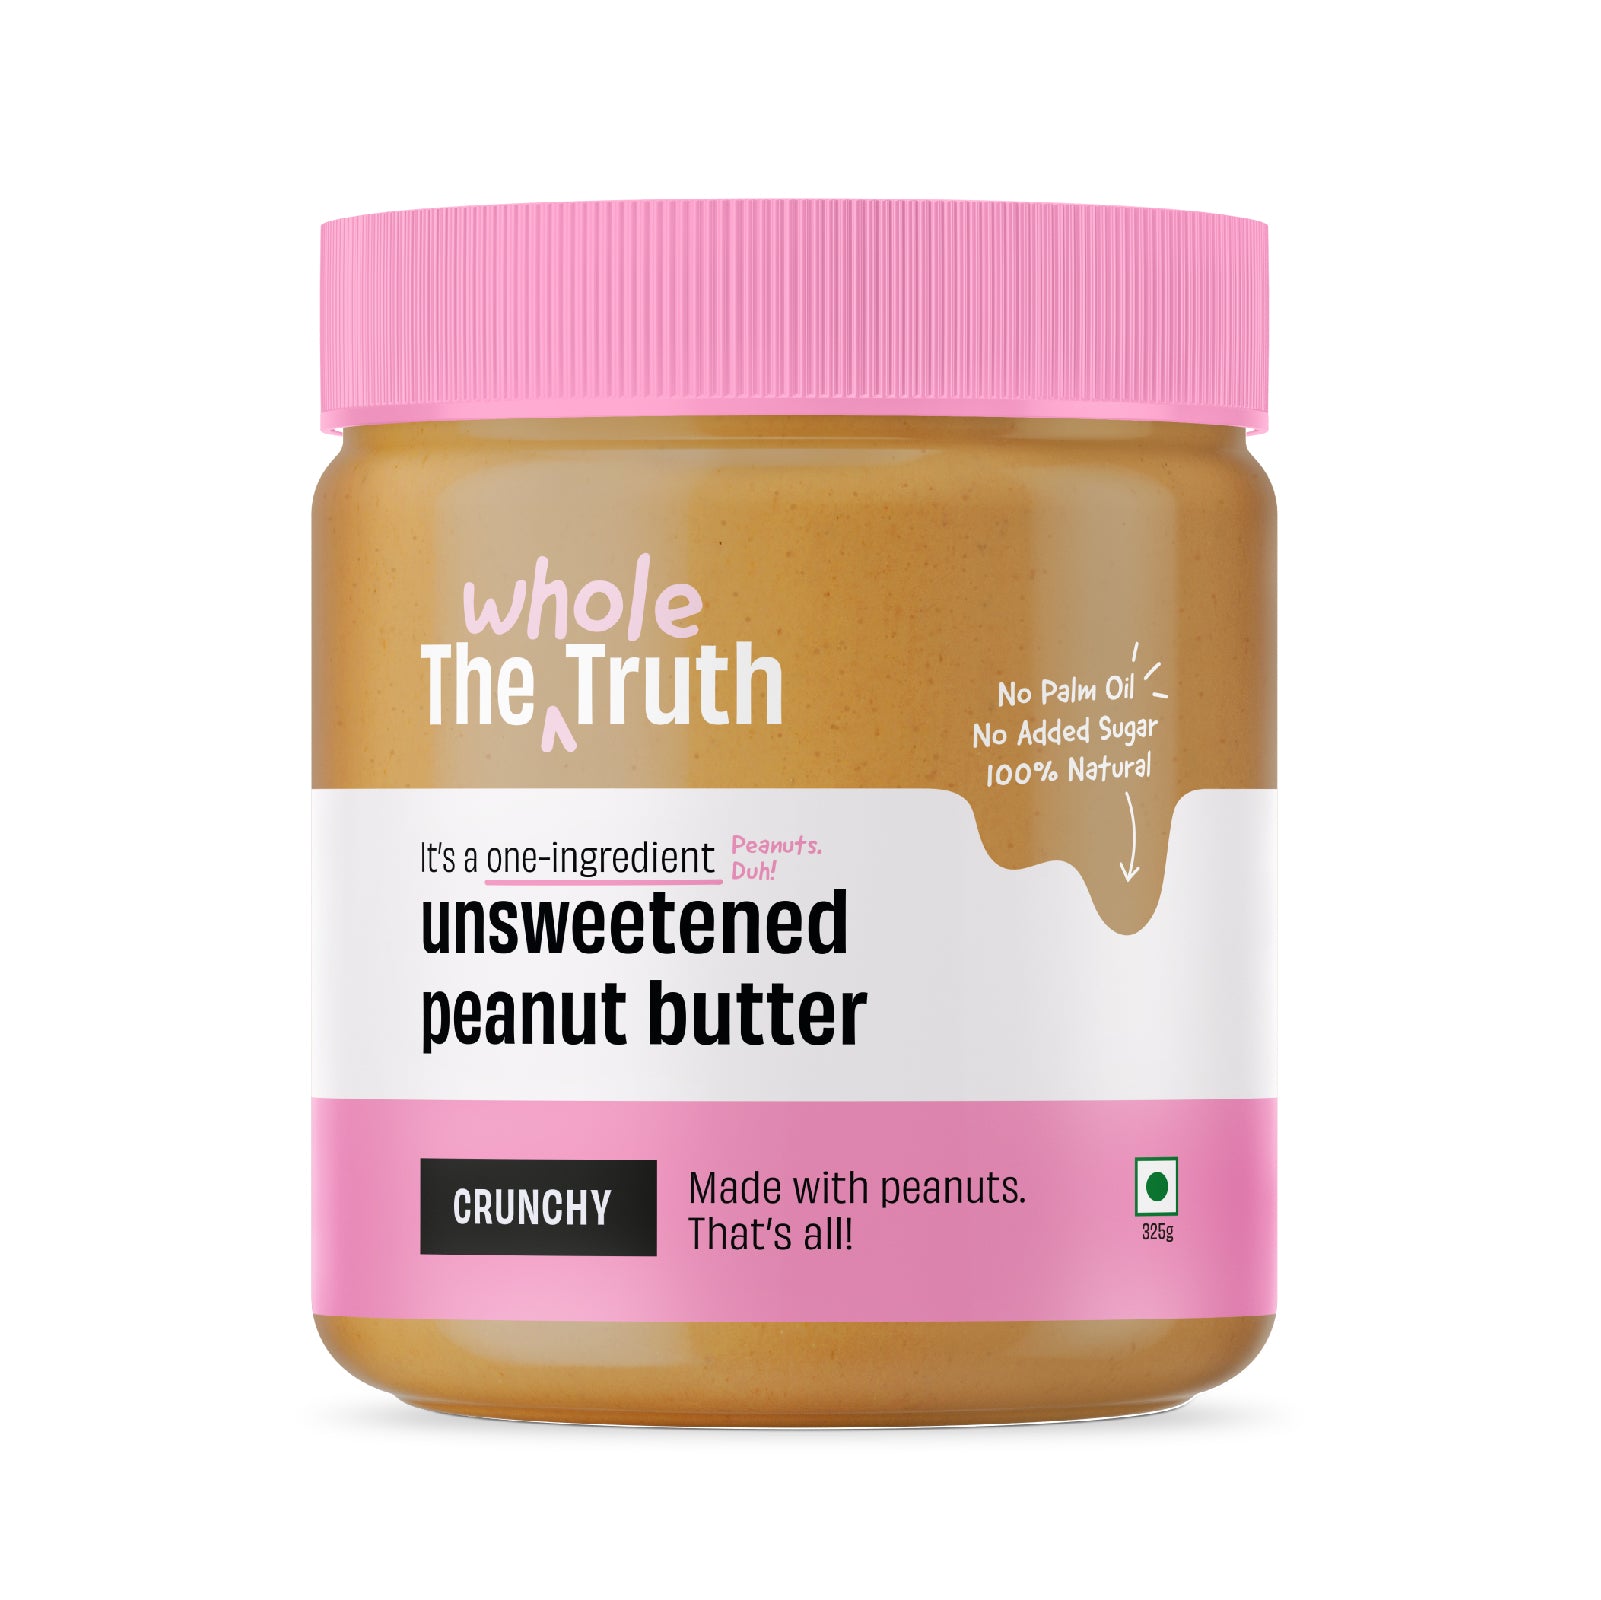 The Whole Truth - Unsweetened Peanut Butter - Crunchy | All Natural | Gluten Free | Vegan